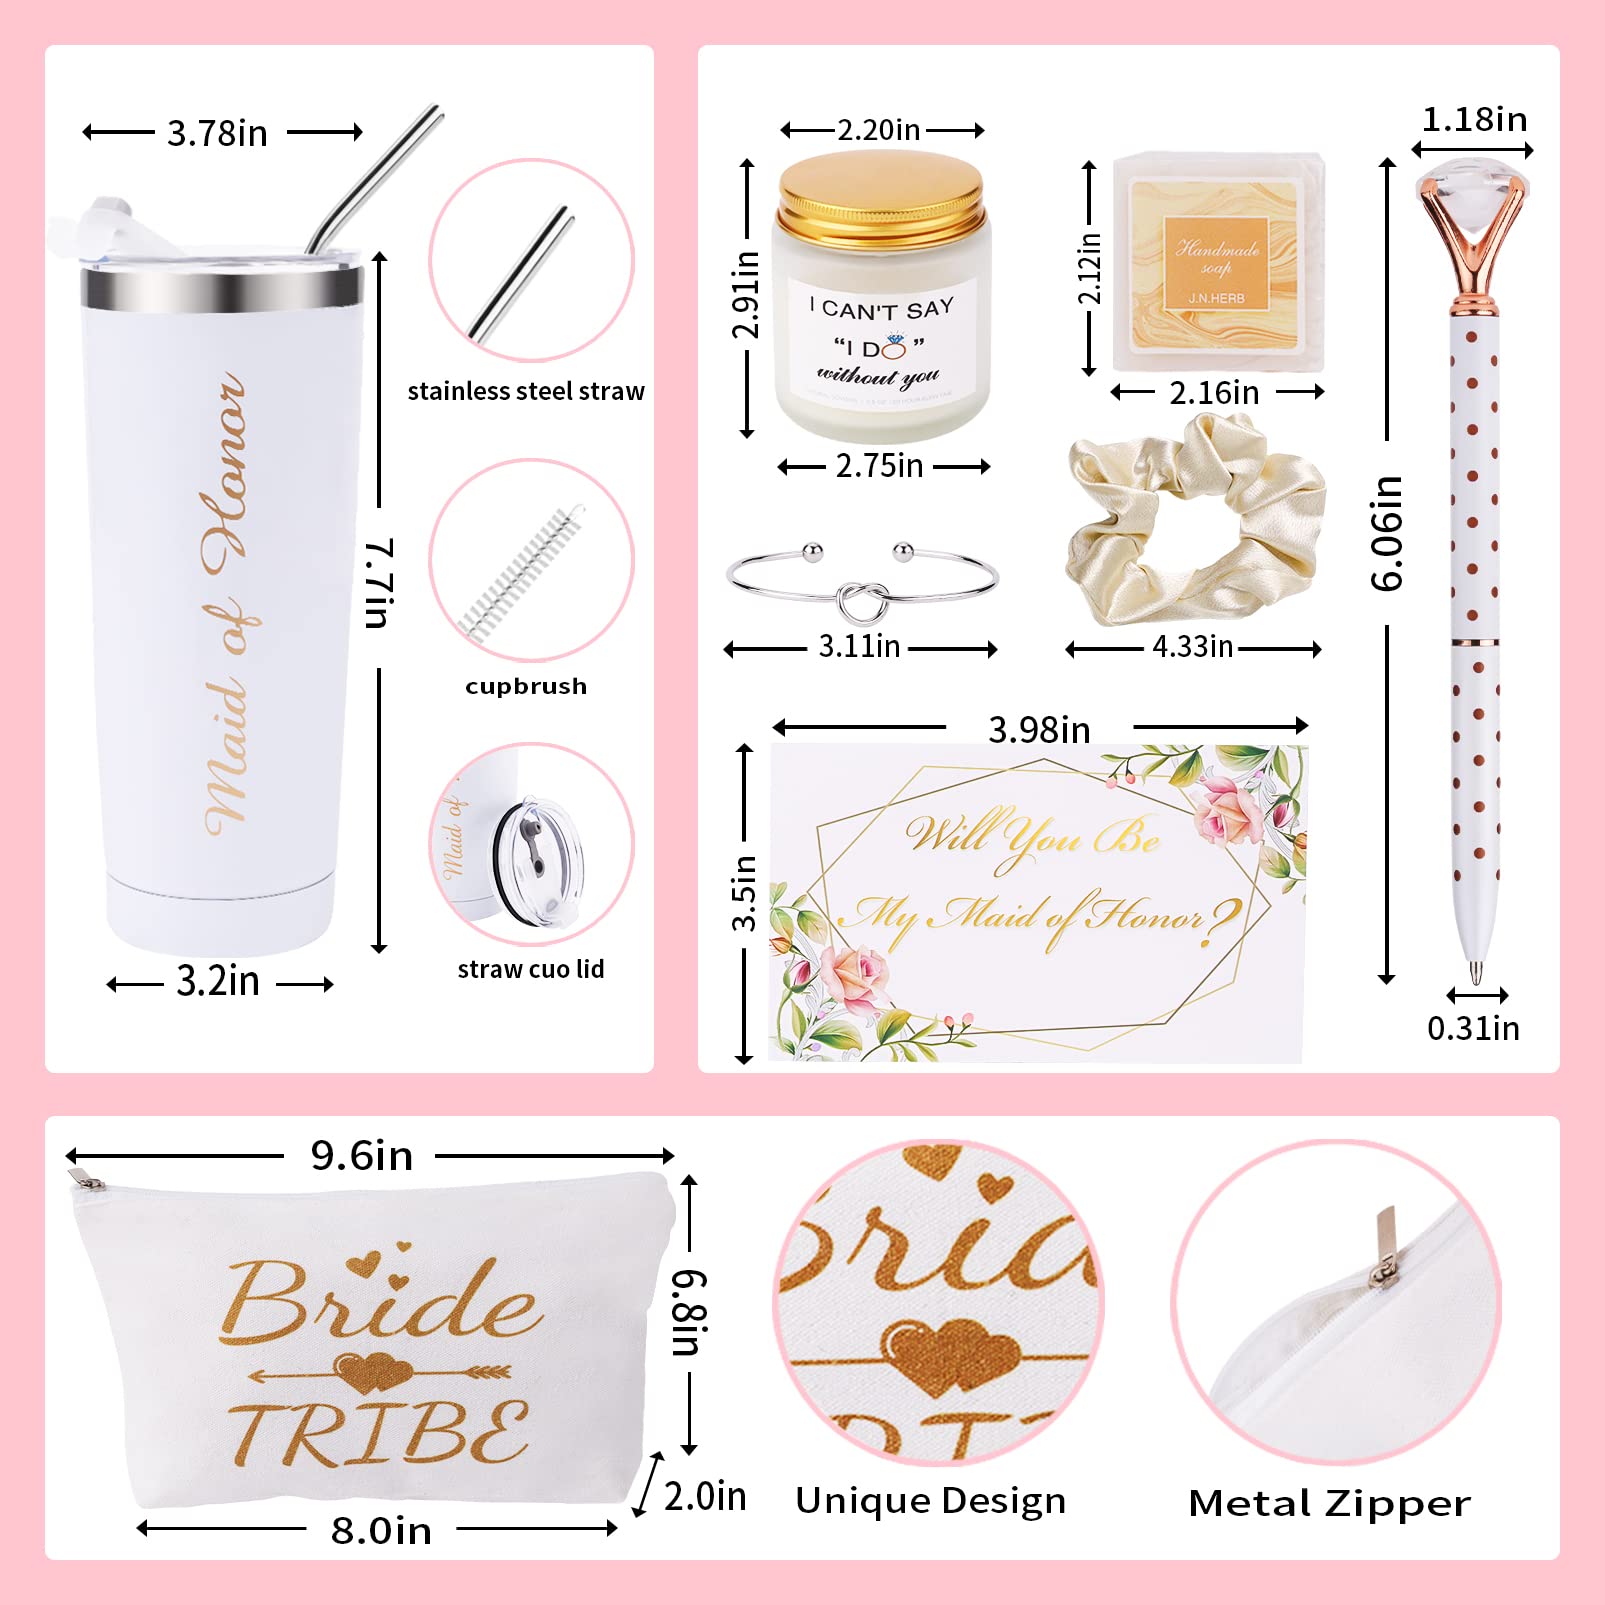 DHQH Bridesmaid Proposal Gifts Bridesmaid Gifts Box from Brides Bachelorette Party Gifts for Bridesmaids Wedding Gifts for Bridesmaid,20oz Bridesmaid Tumbler With Lid and Straws